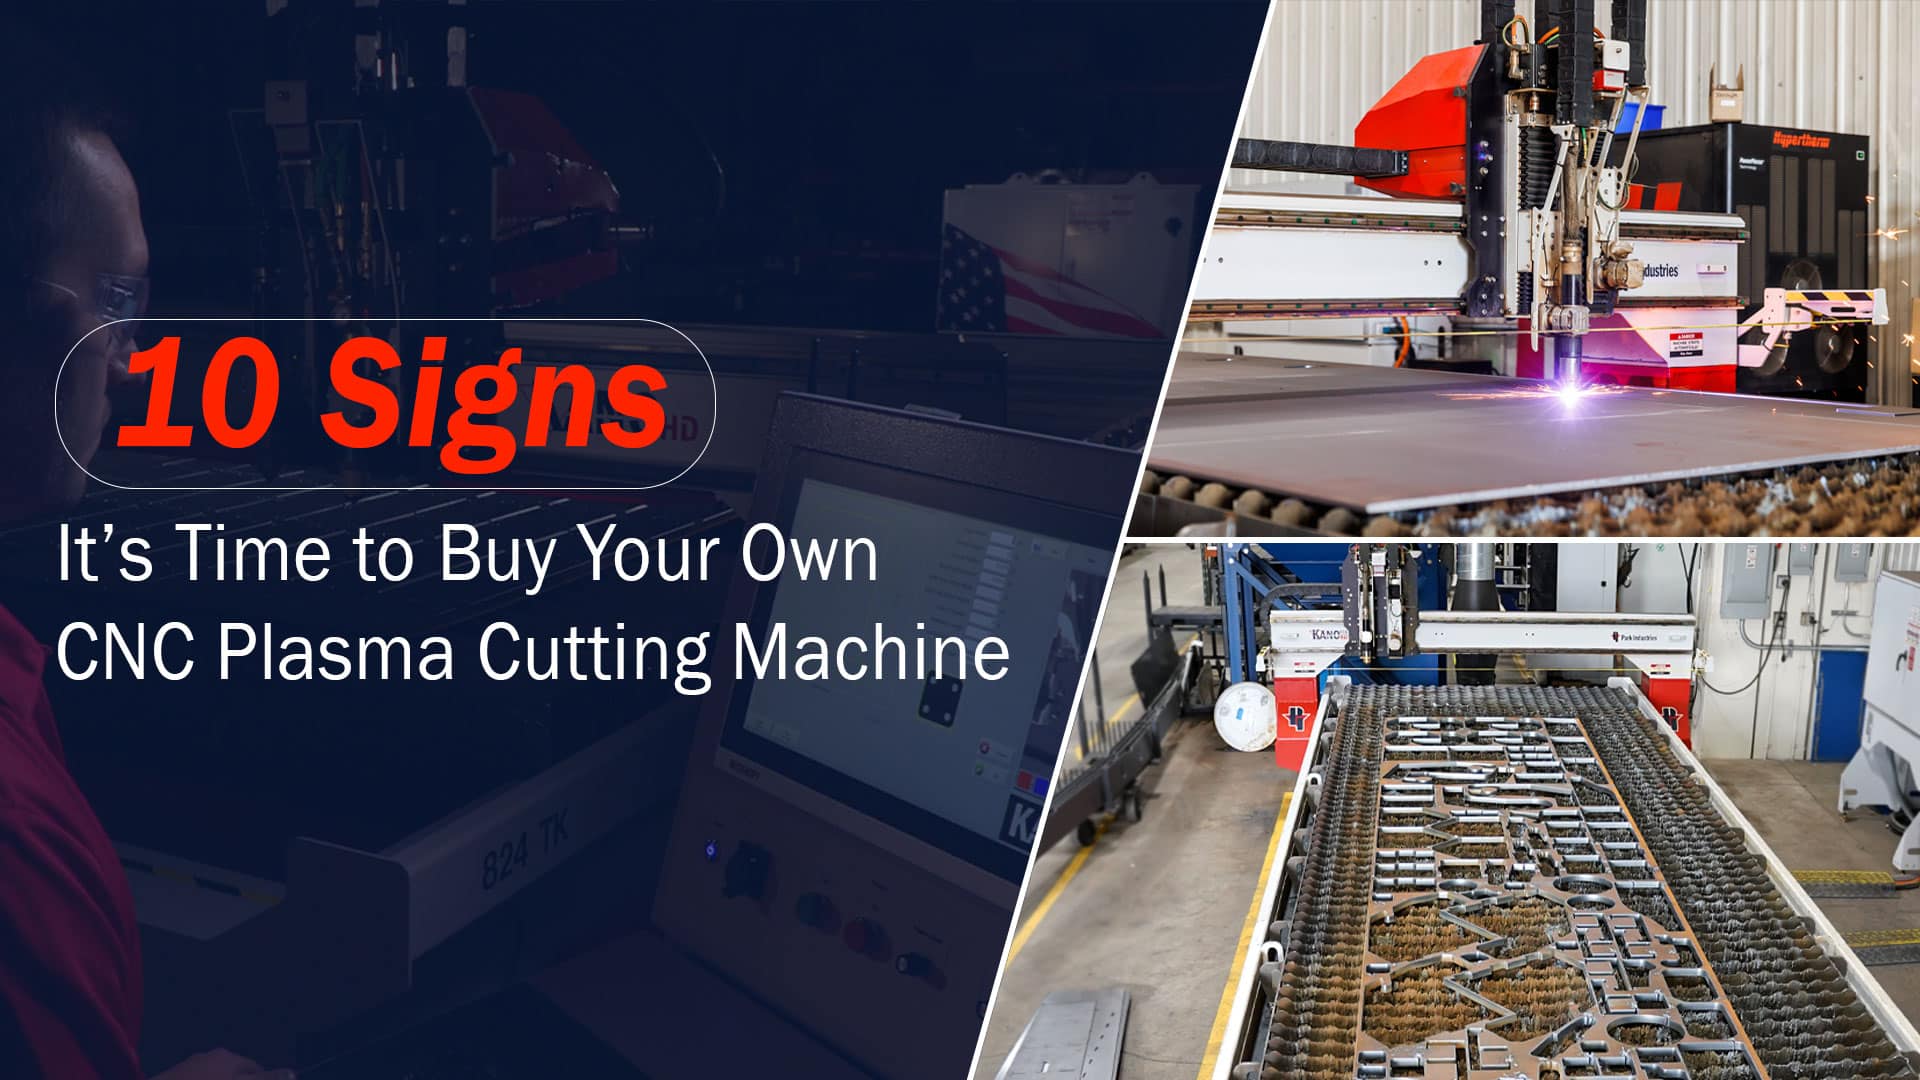 10 Signs it's Time to Buy Your Own CNC Plasma Cutting Machine